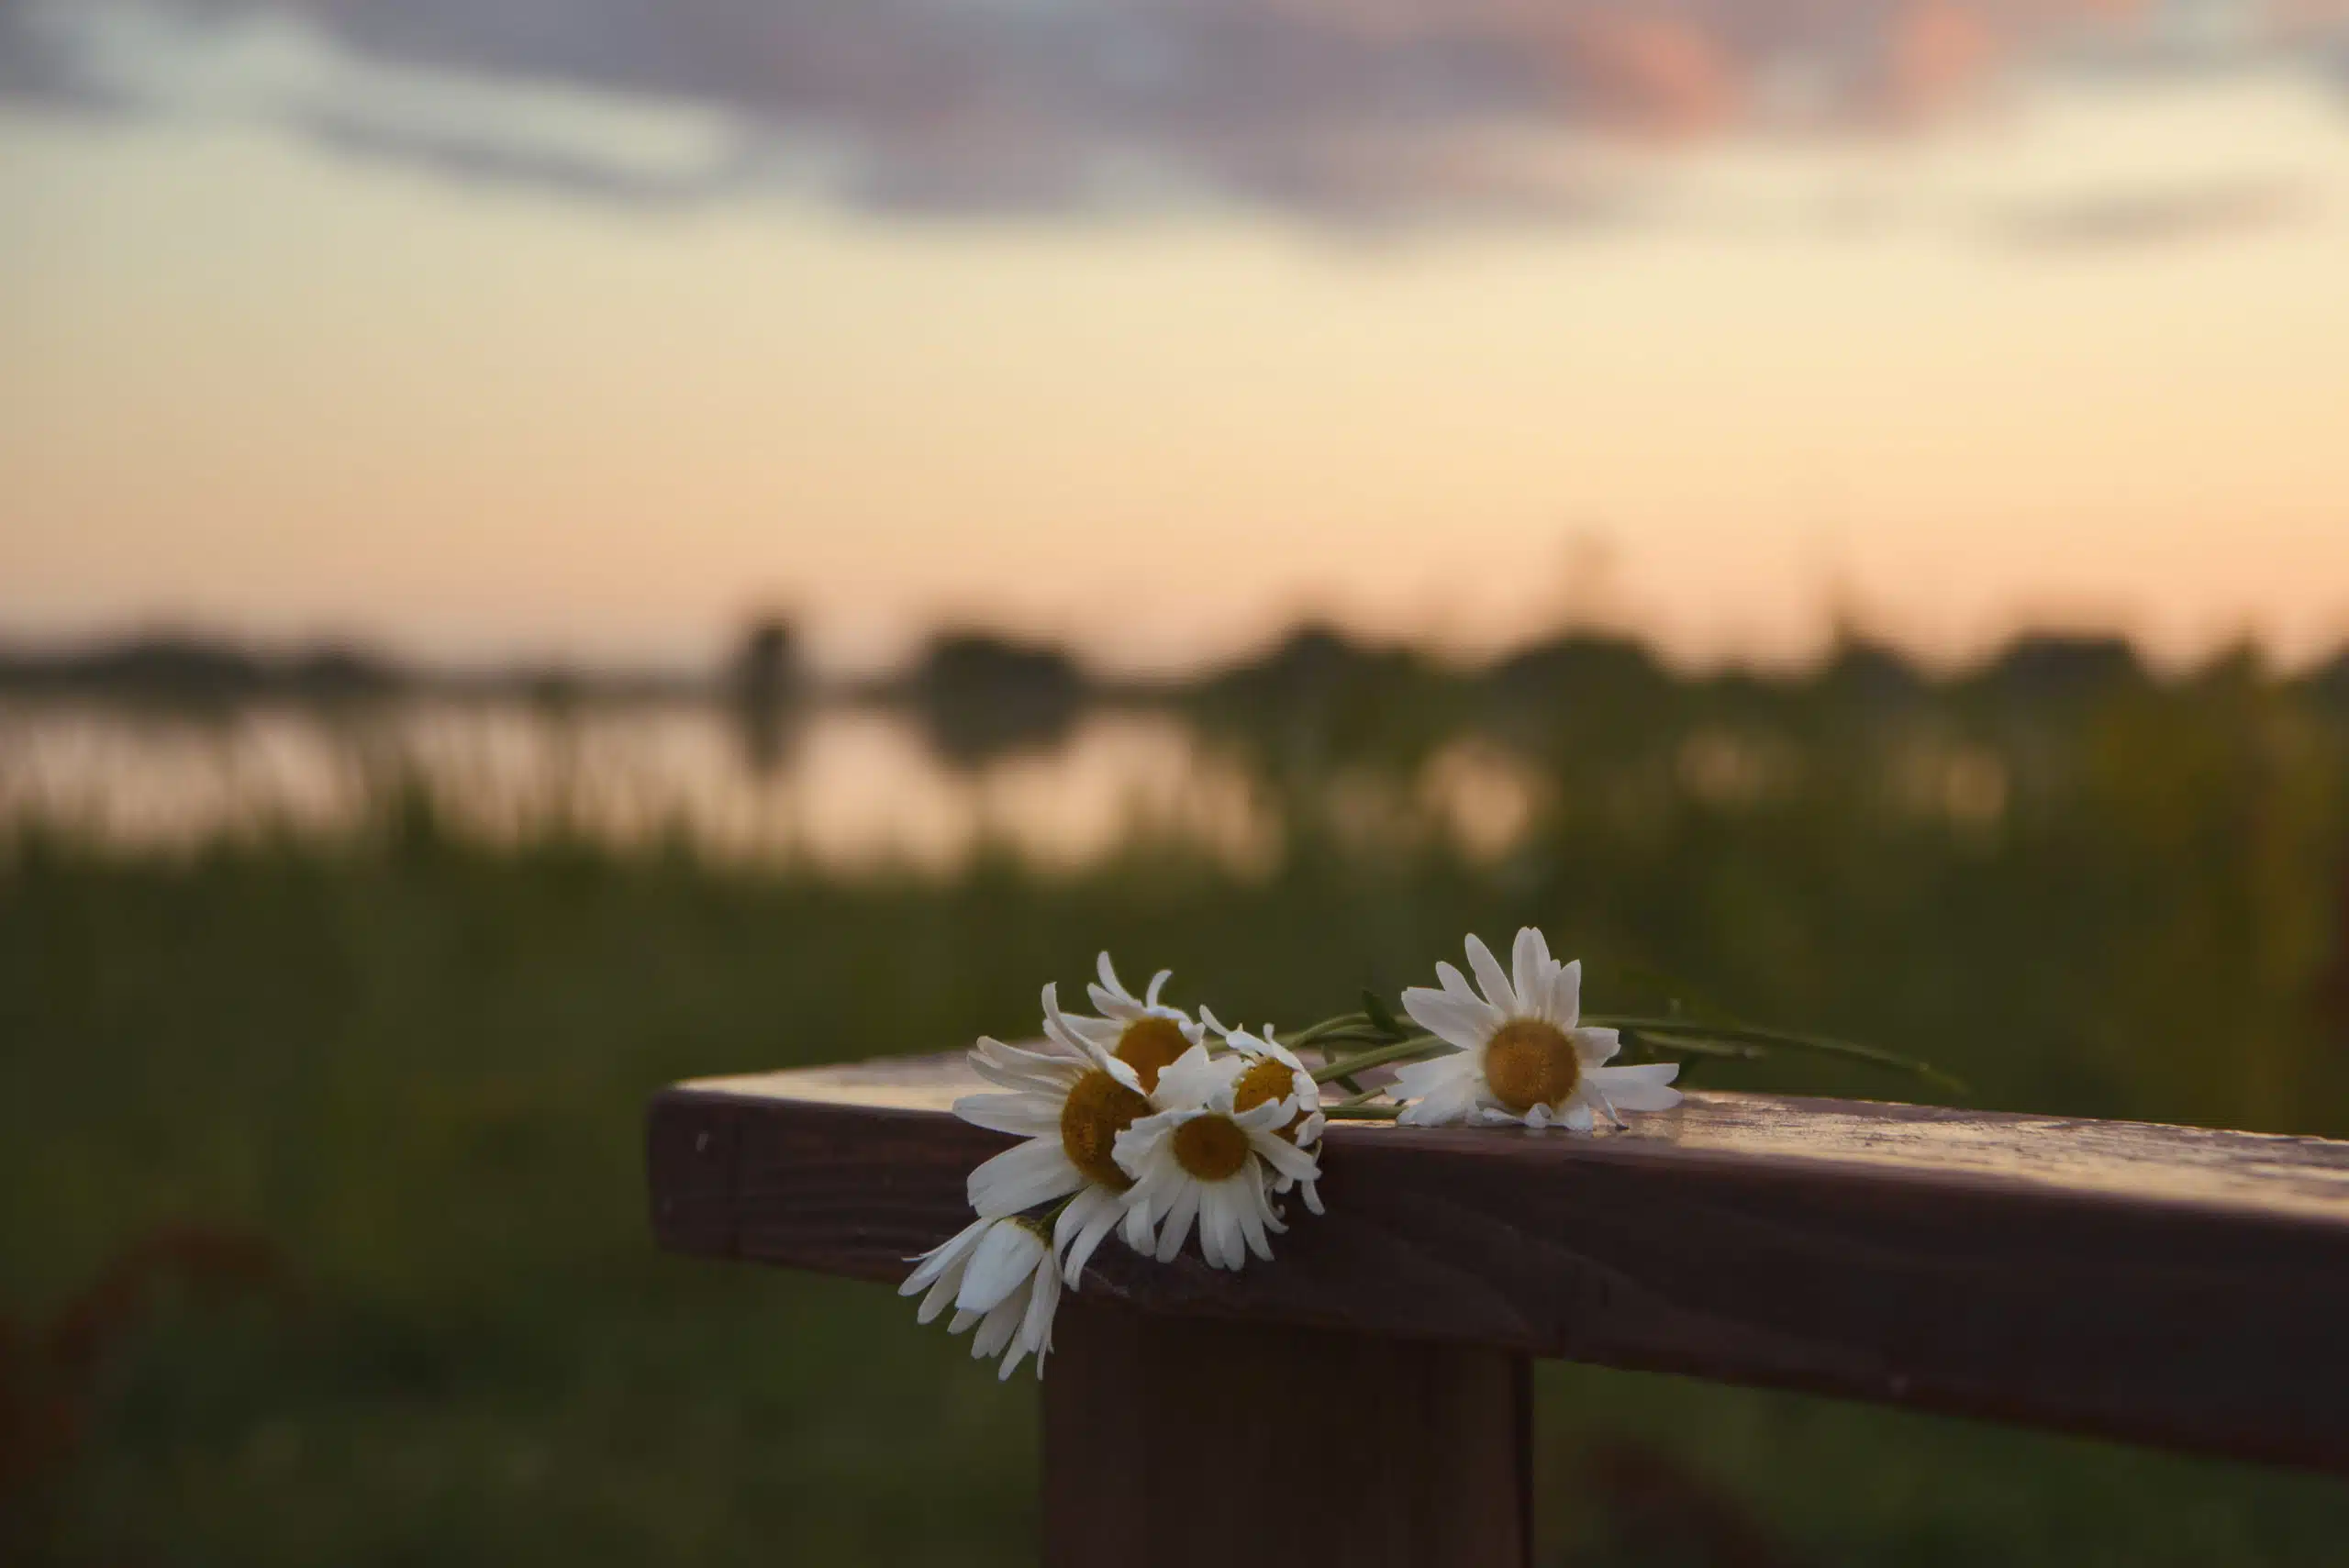 Daises on wooden bench